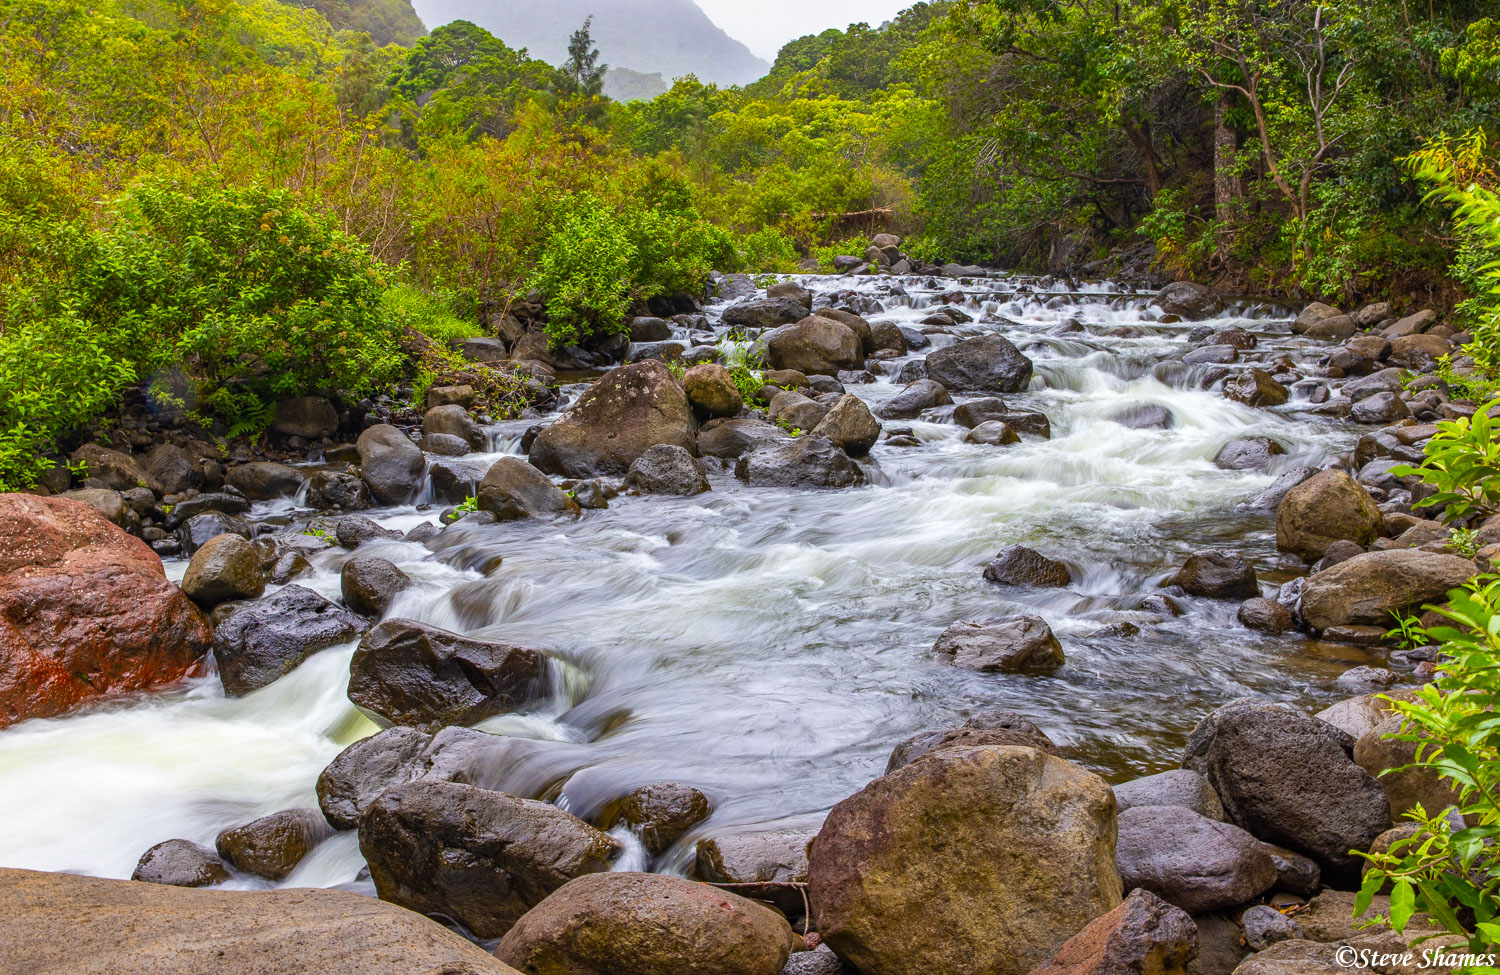 Here within Iao Valley State Monument in west Maui, several babbling streams run through it.